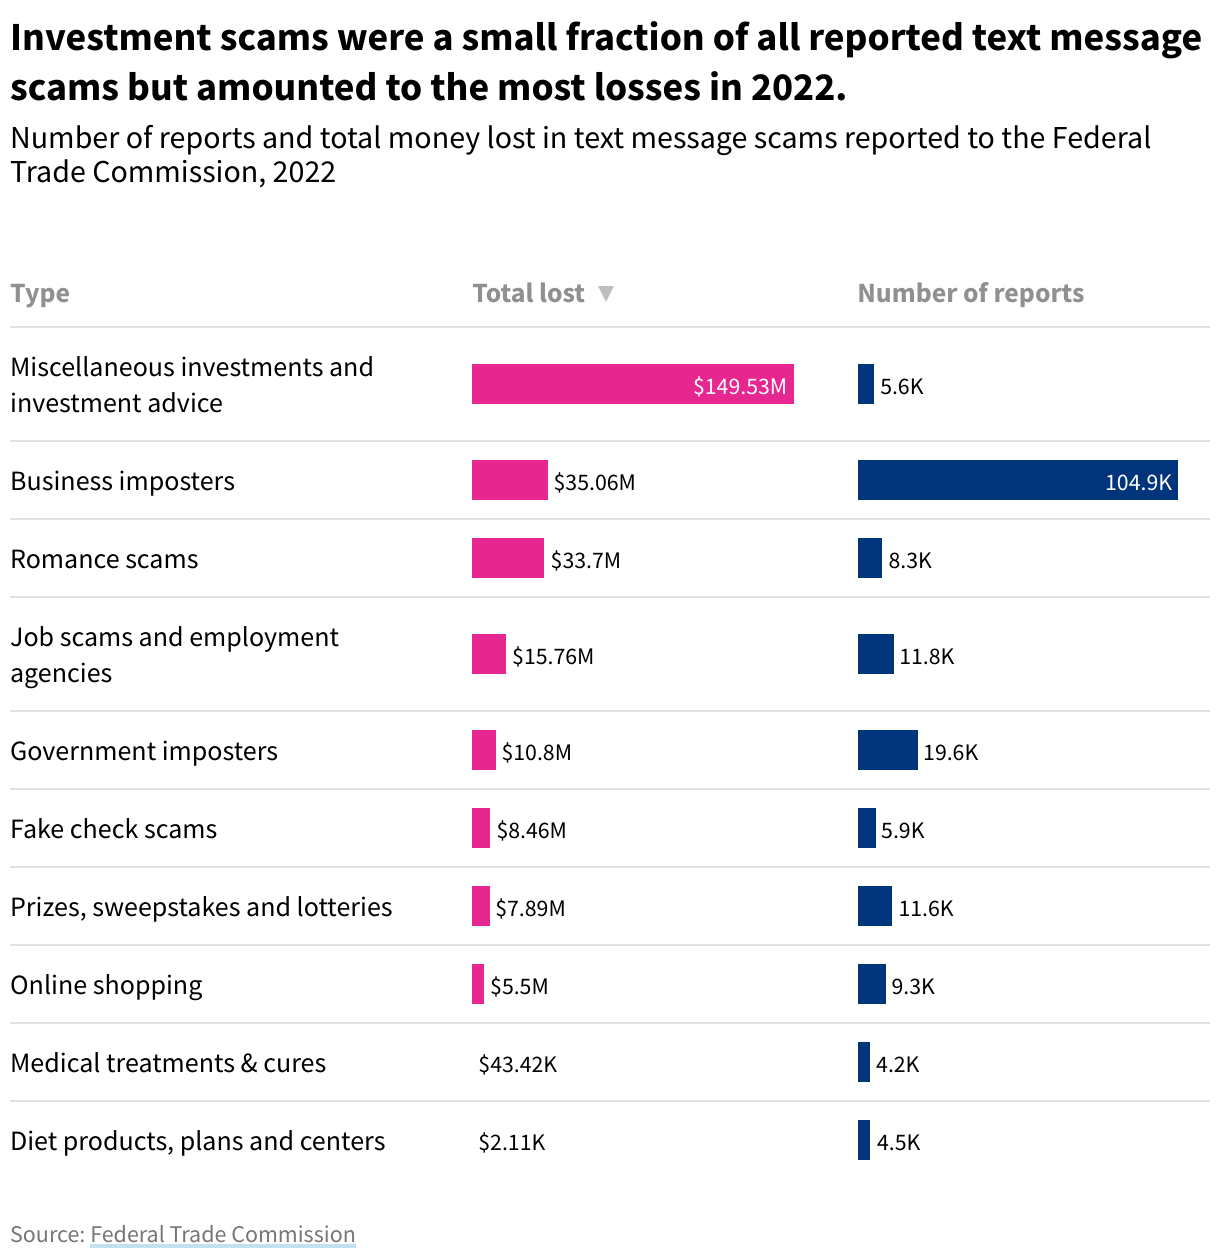 Bar chart comparing the umber of reports and total money lost in text message scams reported to the Federal Trade Commission in 2022. Investment scams were a small fraction of all reported text message scams but amounted to the most losses in 2022.